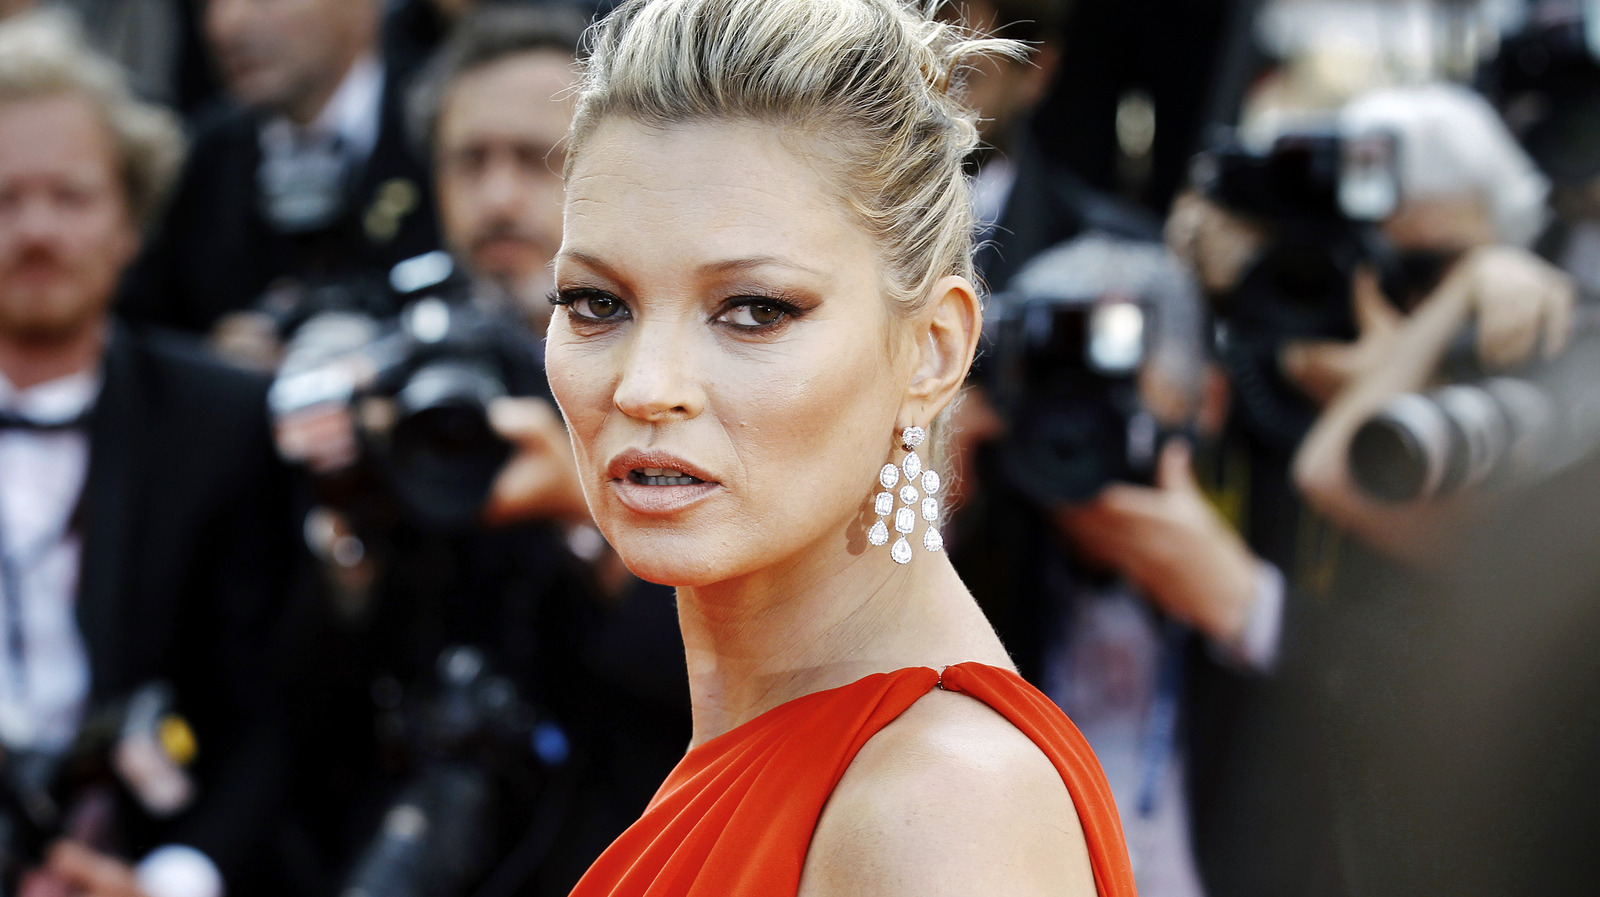 major scandals involving supermodels that are seriously sketchy